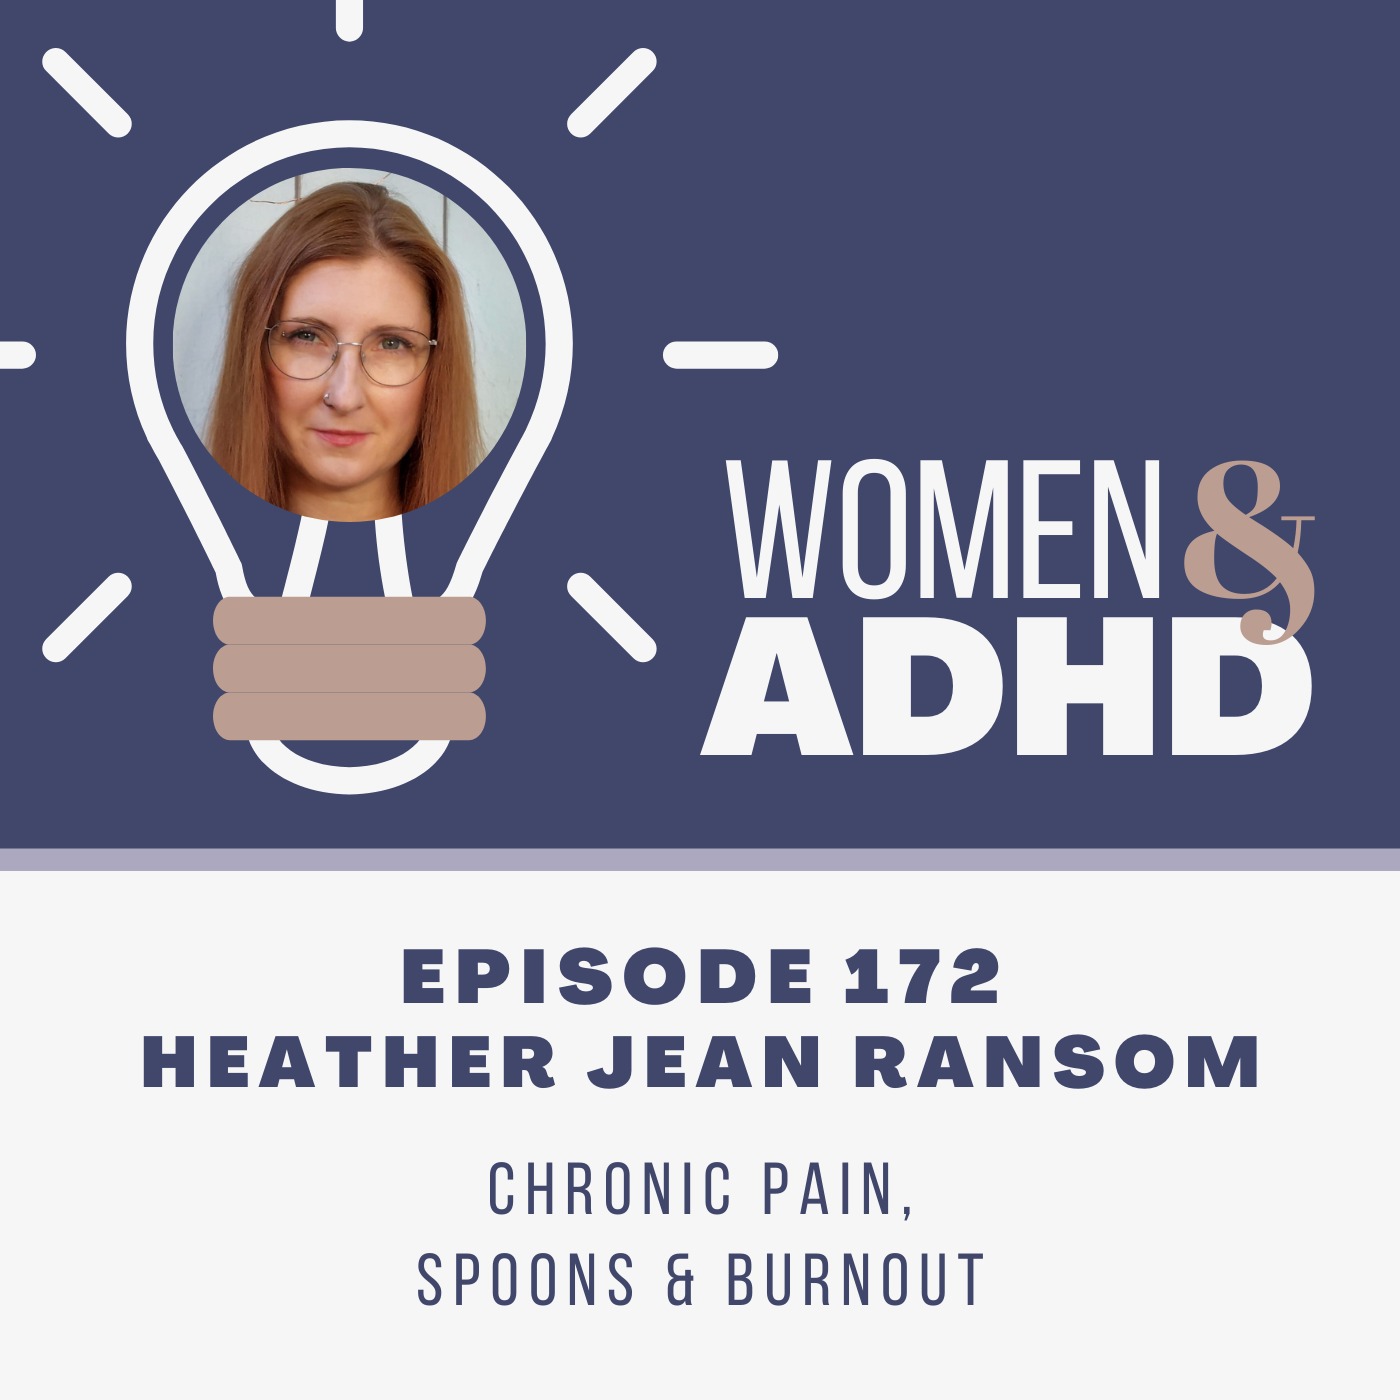 Heather Jean Ransom: Chronic pain, spoons & burnout